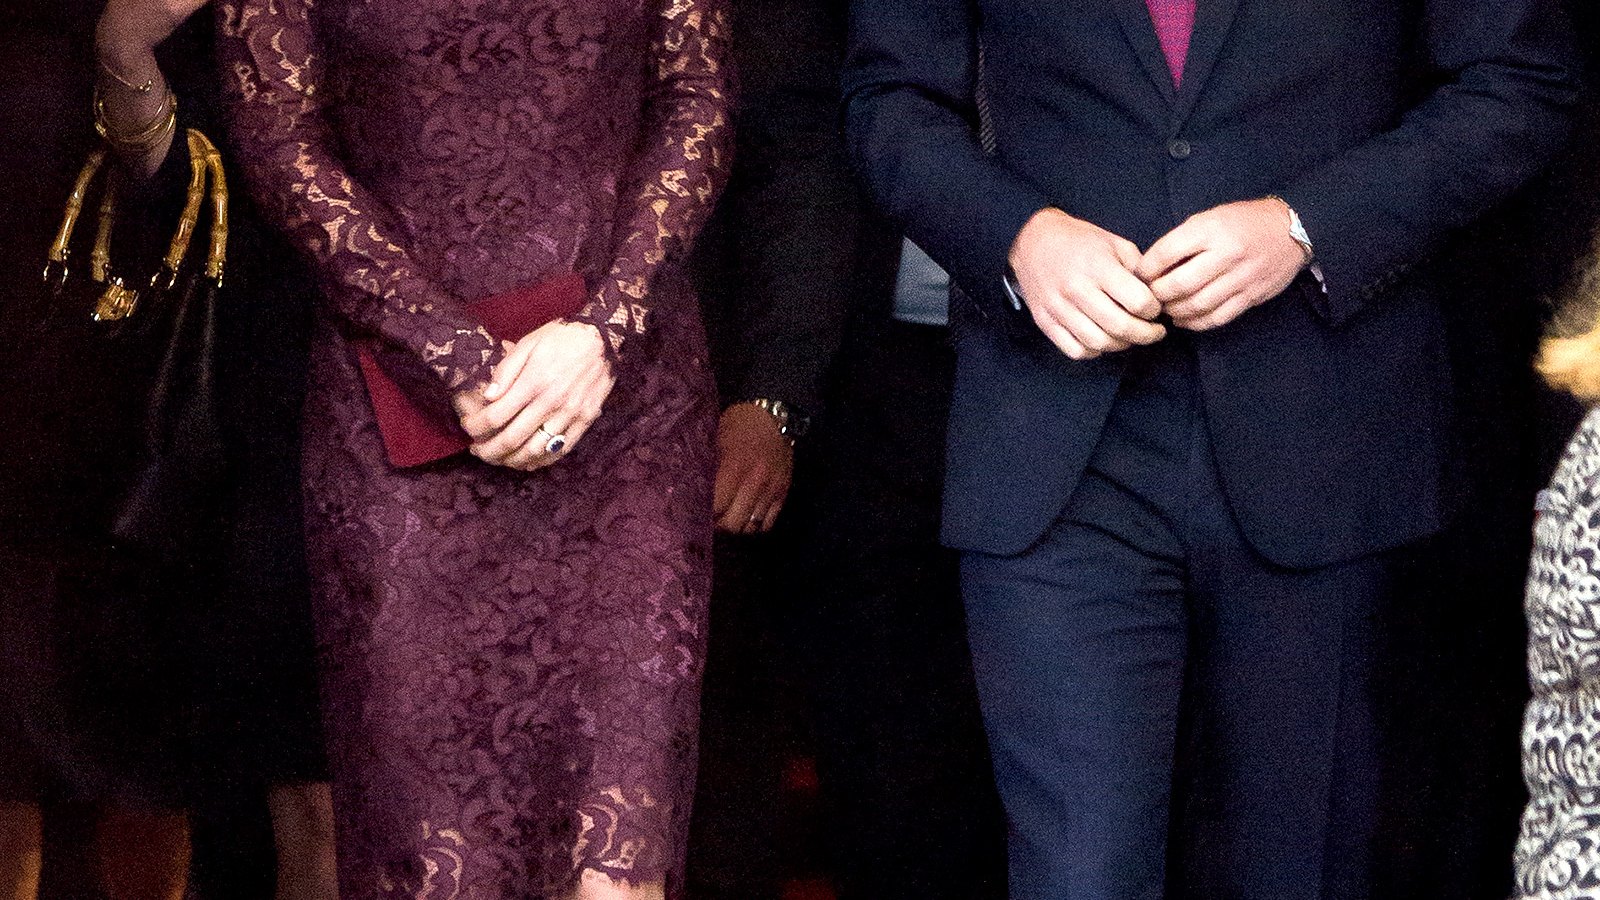 Kate Middleton and Prince William on October 21, 2015 in London.